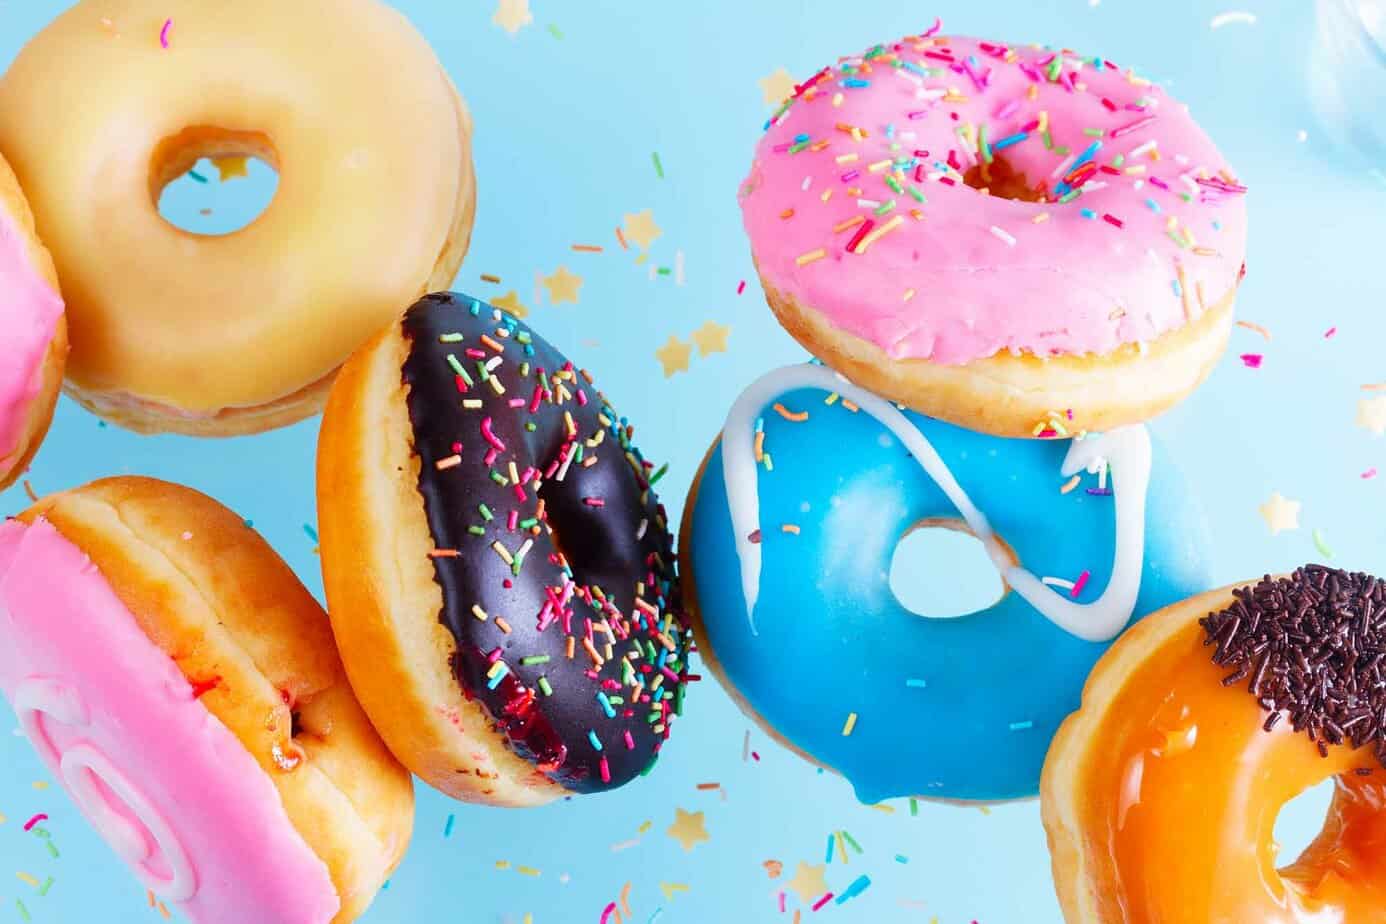 doughnuts of various flavors and toppings behind blue background